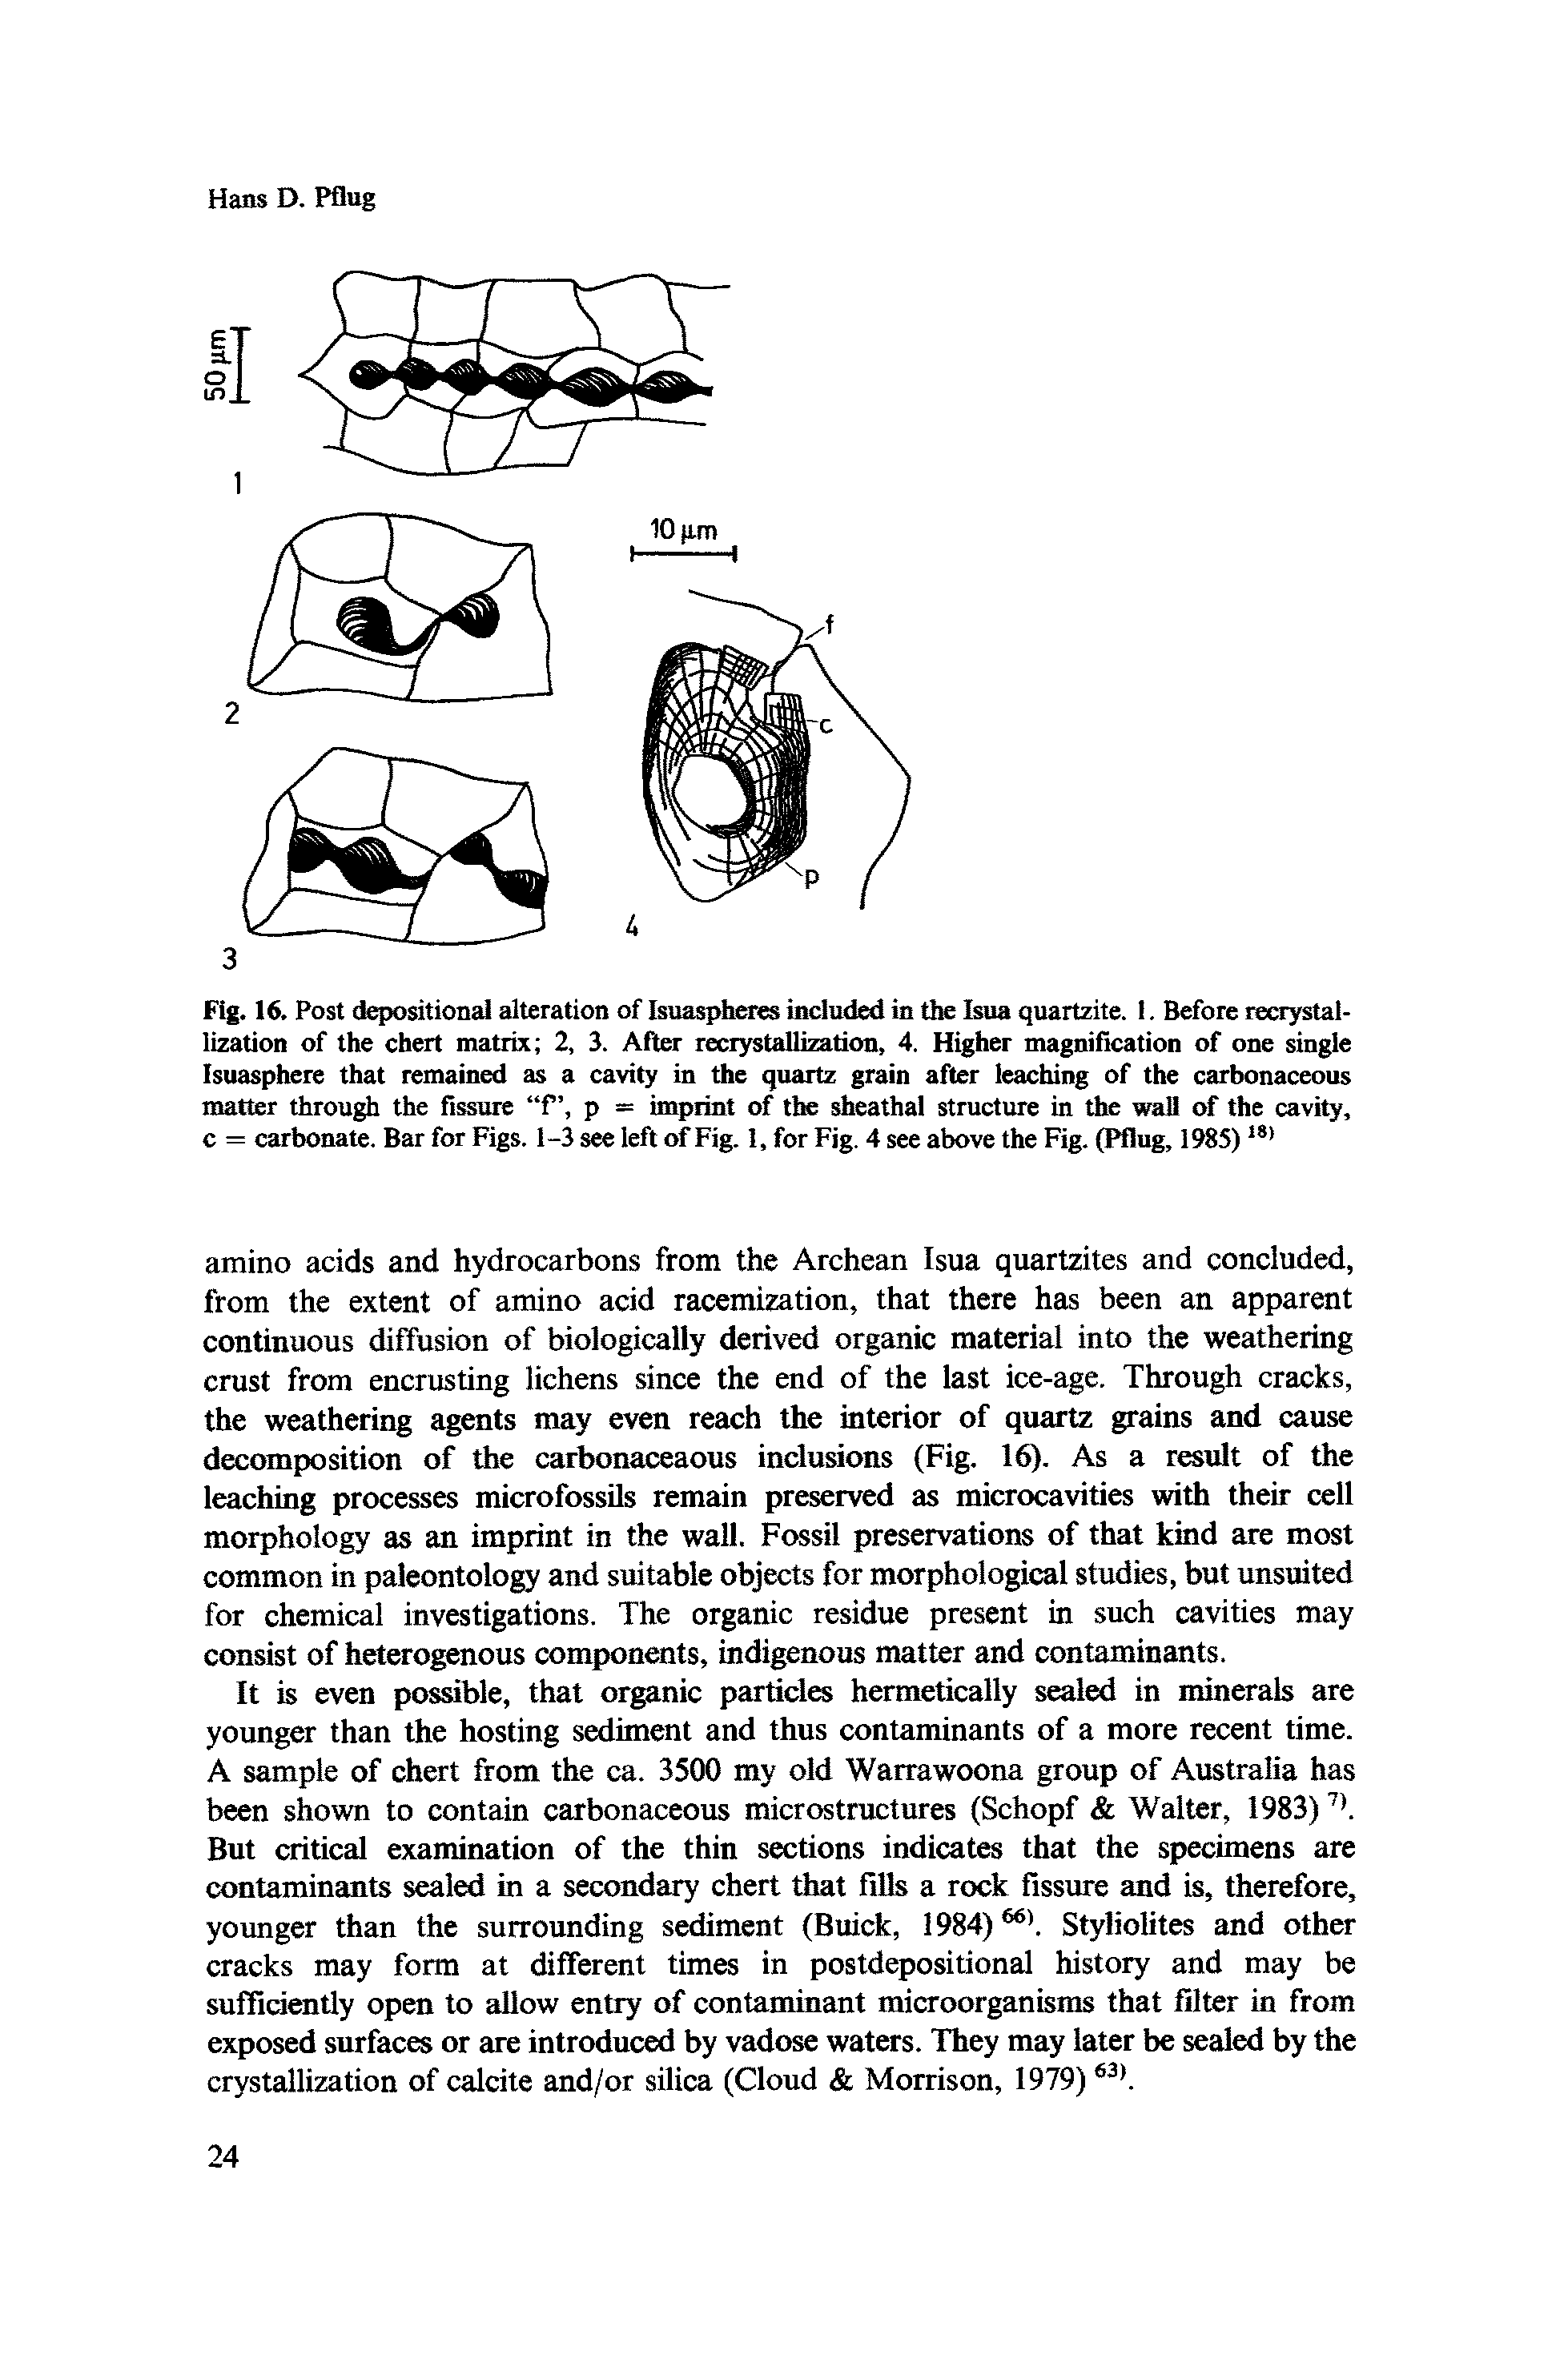 Fig. 16. Post depositional alteration of Isuaspheres included in the Isua quartzite, i. Before recrystallization of the chert matrix 2, 3. After recrystallization, 4. Higher magnification of one single Isuasphere that remained as a cavity in the quartz grain after leaching of the carbonaceous matter through the fissure fp = imprint of the sheathal structure in the wall of the cavity, c = carbonate. Bar for Figs. 1-3 see left of Fig. 1, for Fig. 4 see above the Fig. (Pflug, 1985)18>...